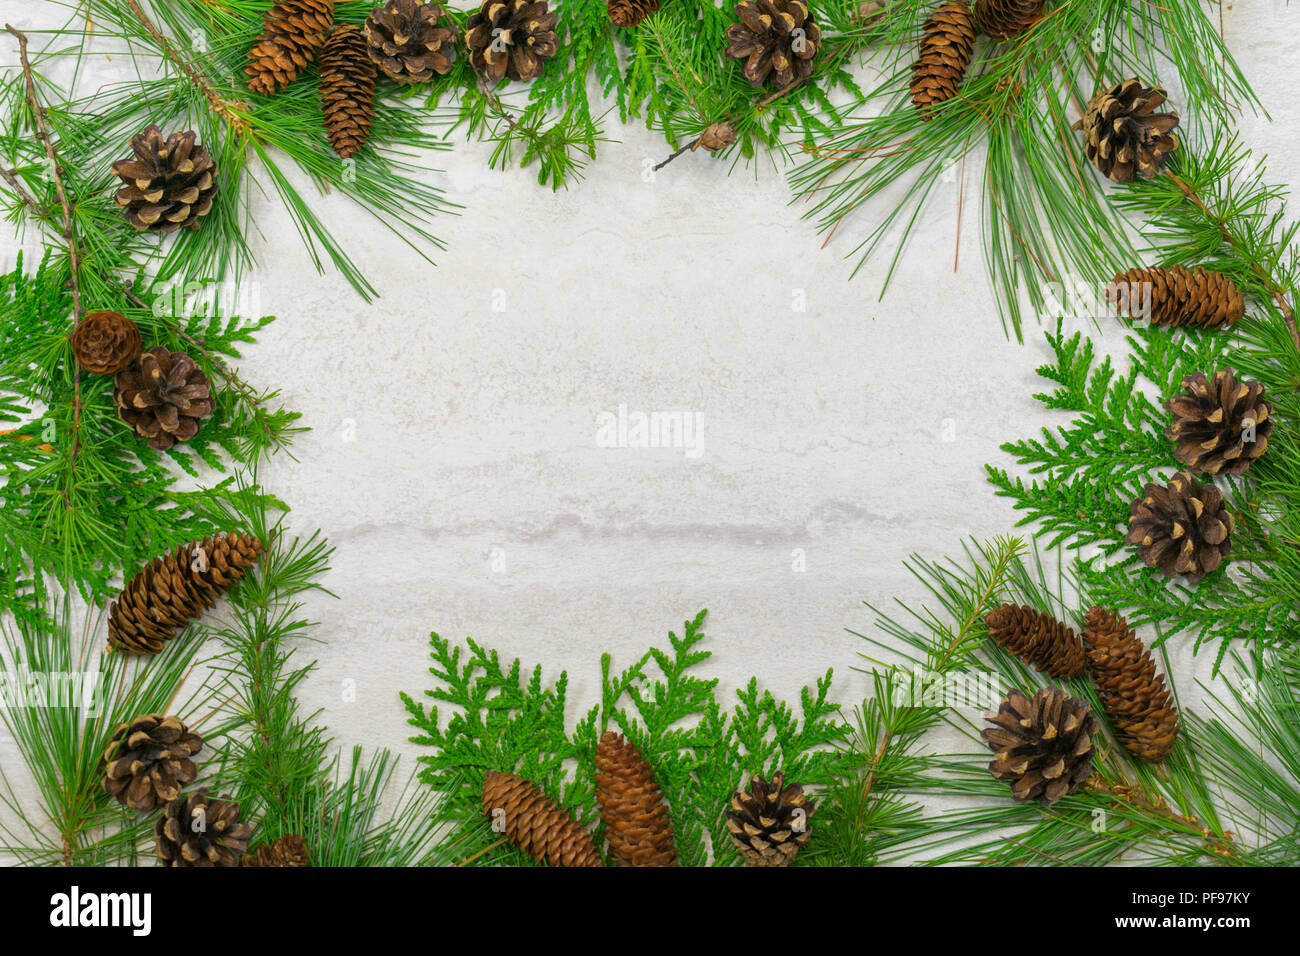 A border of cedar, white pine, and tamarack branches along with scotch pine  and spruce  pine cones with copy space in the middle Stock Photo